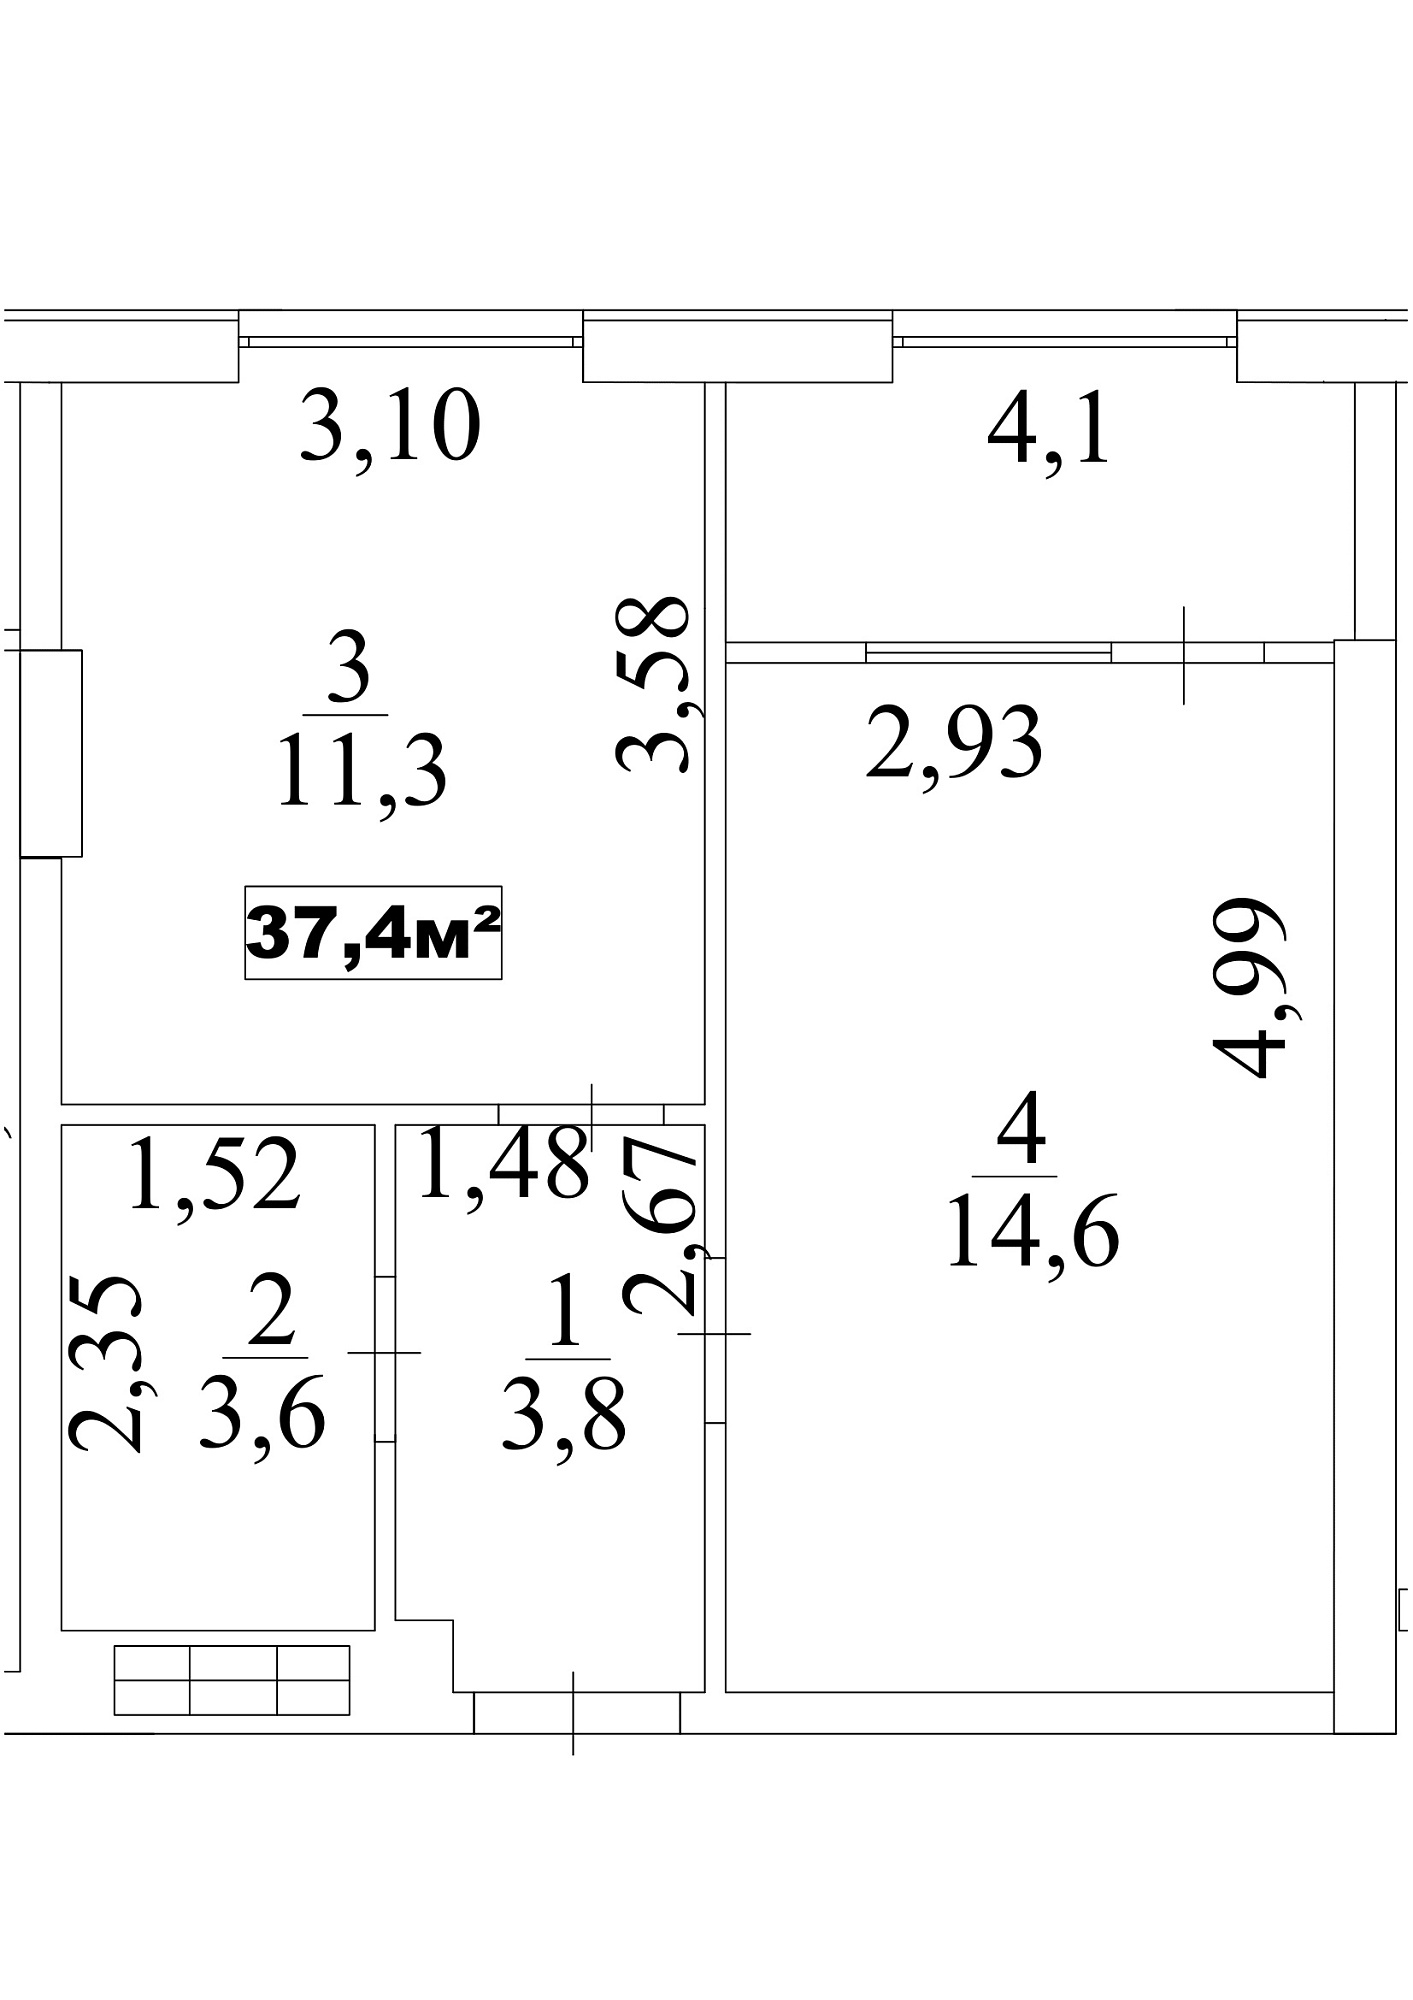 Planning 1-rm flats area 37.4m2, AB-10-08/0070а.